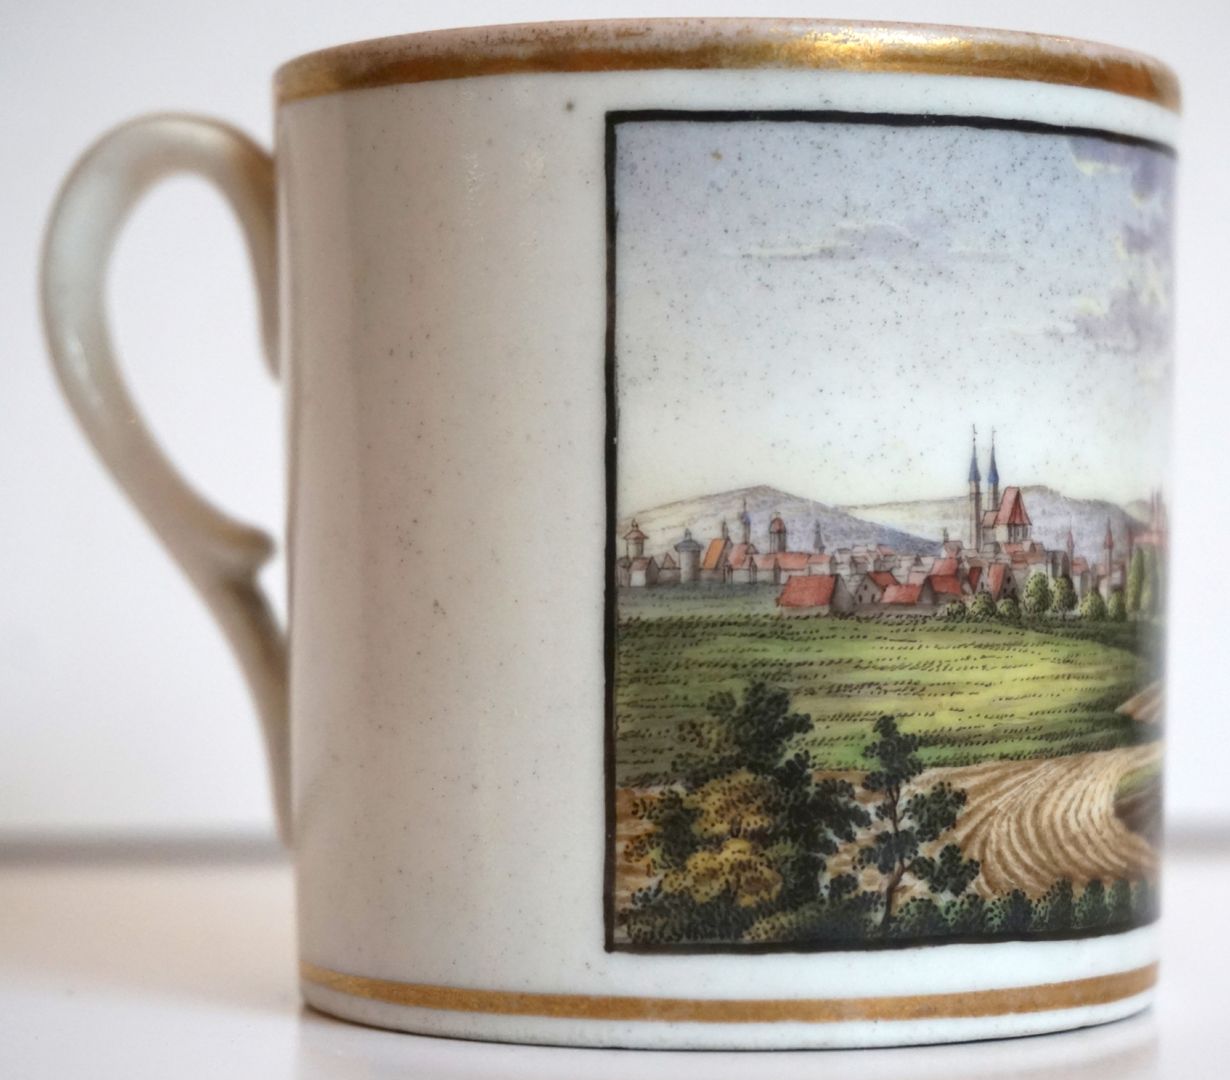 Cup with Nuremberg view from 